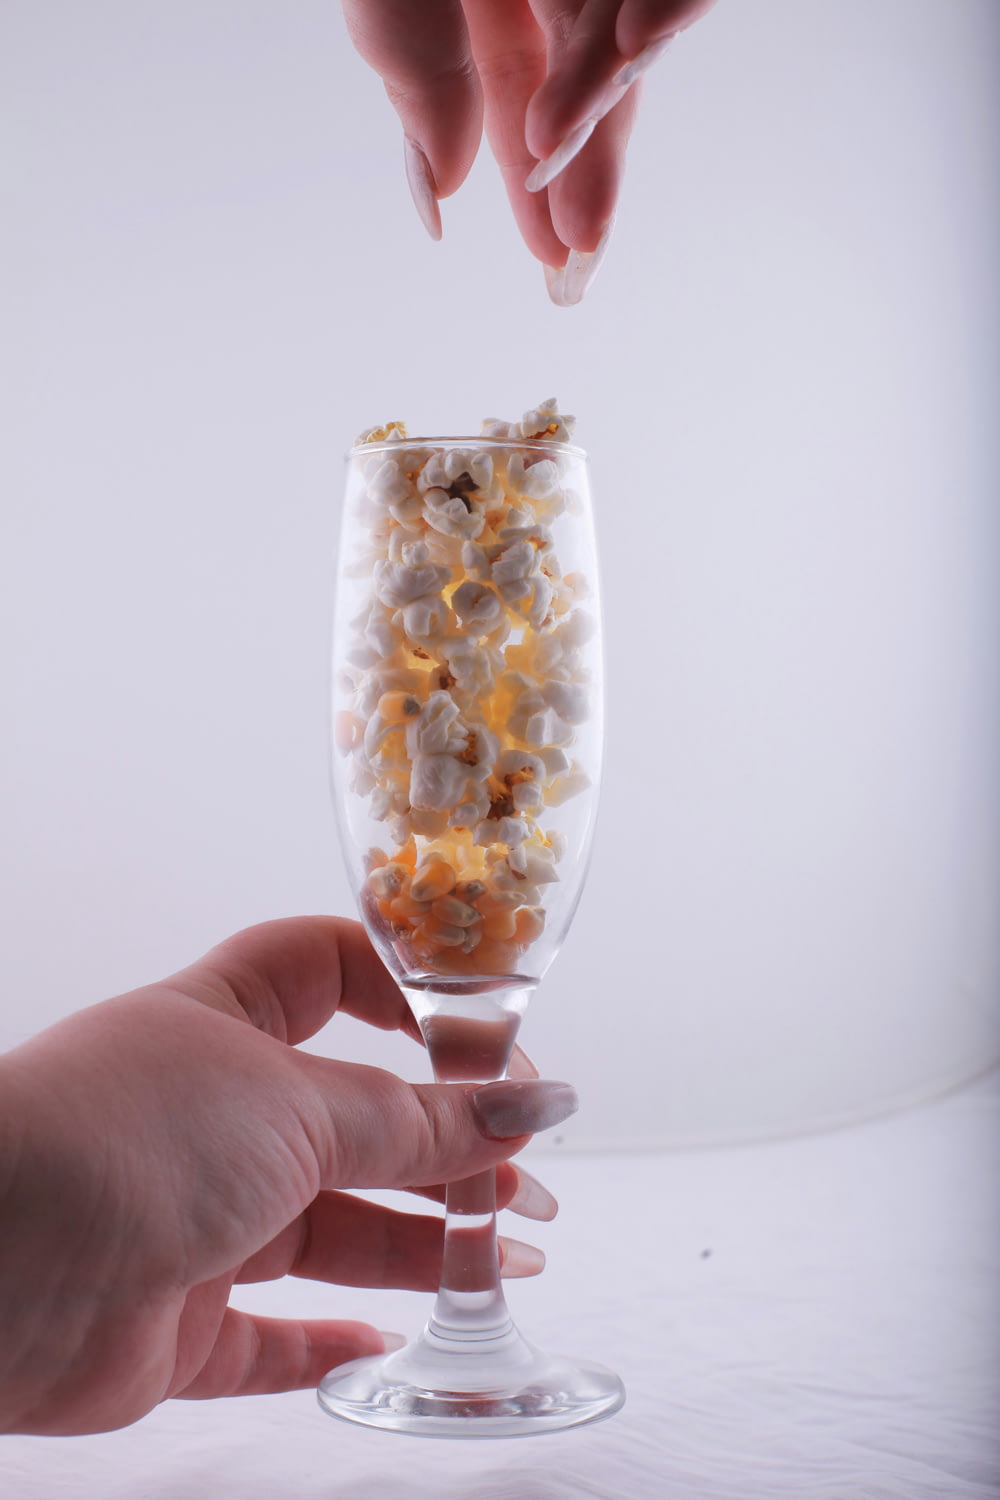 a hand reaching for a wine glass filled with popcorn